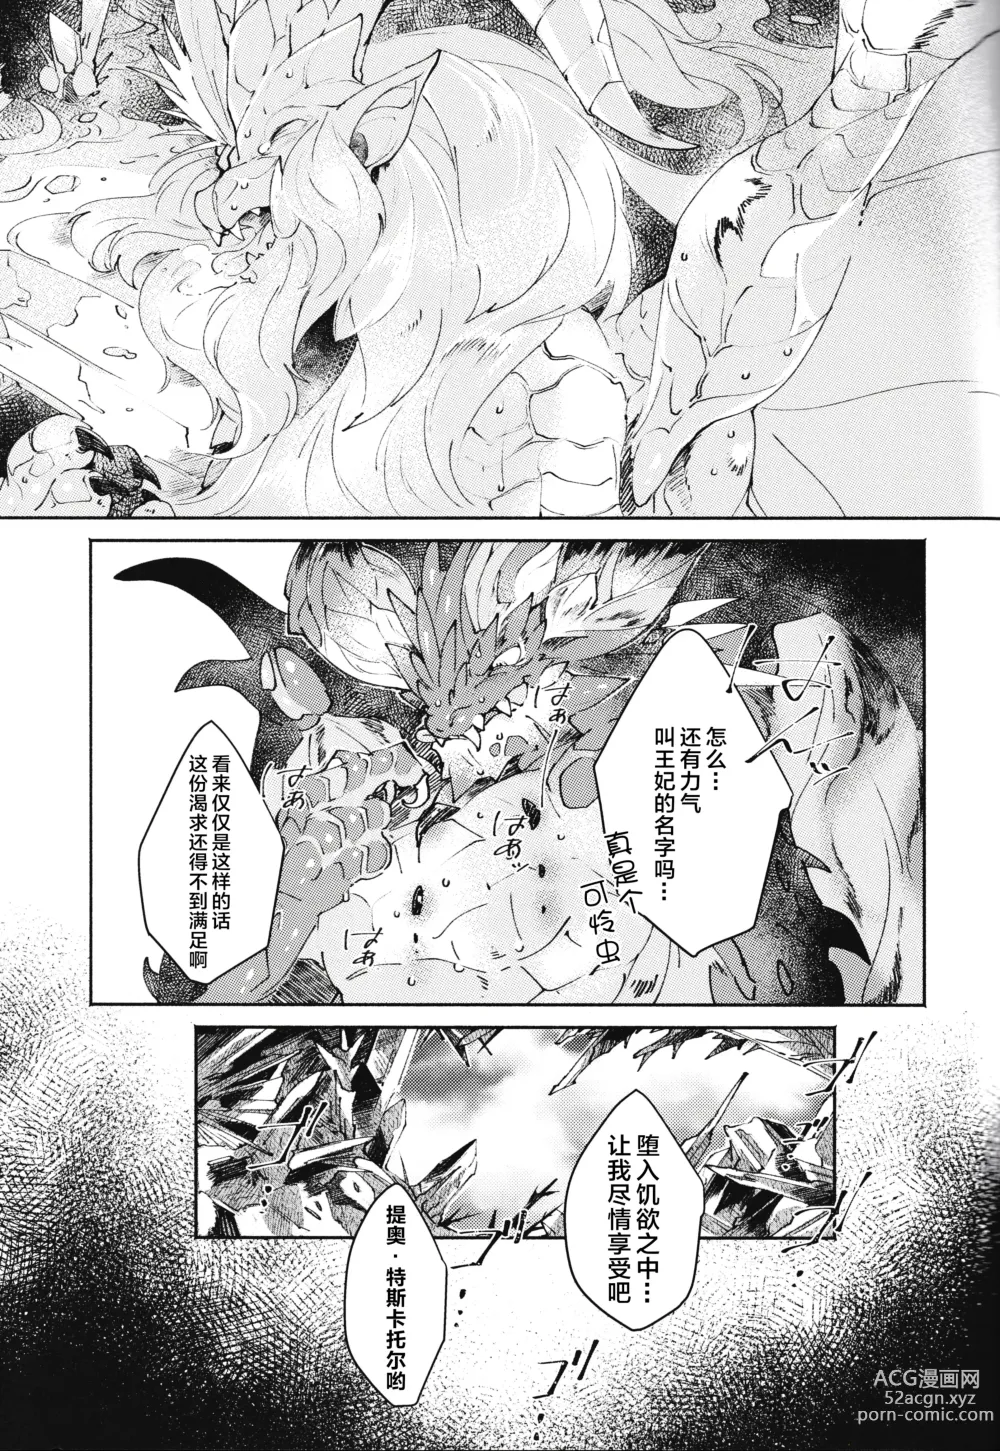 Page 35 of doujinshi Lawless